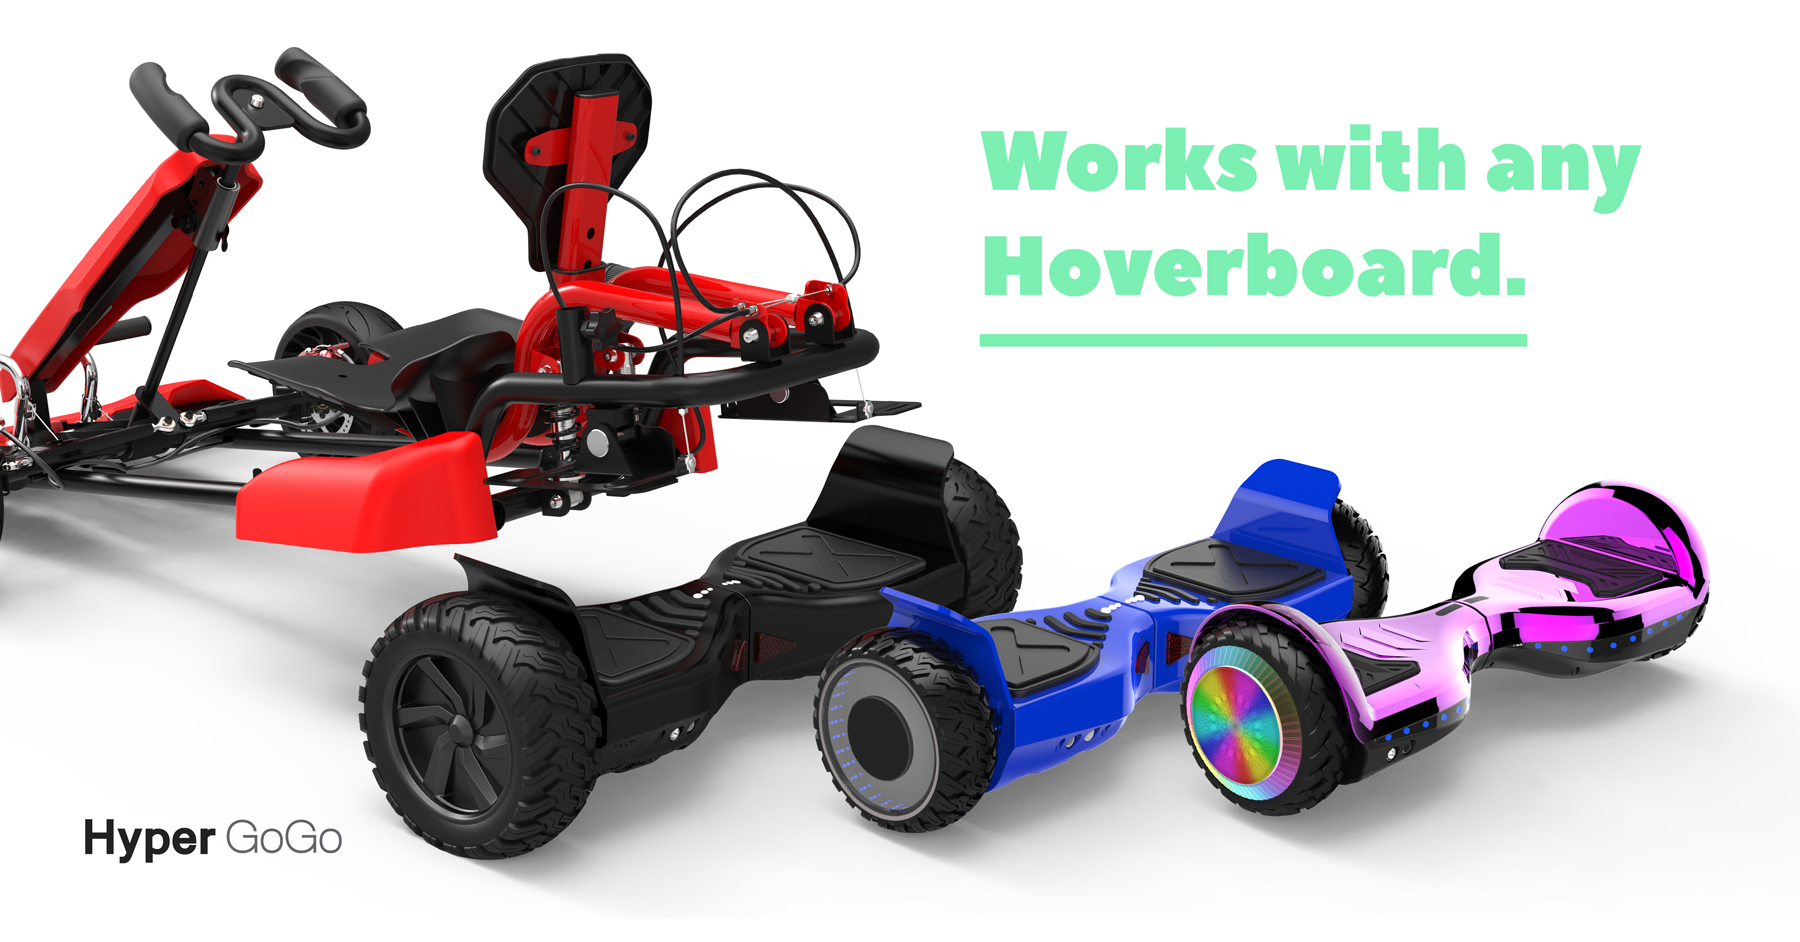 Go Kart Kit by Hyper GOGO - fits any hoverboard